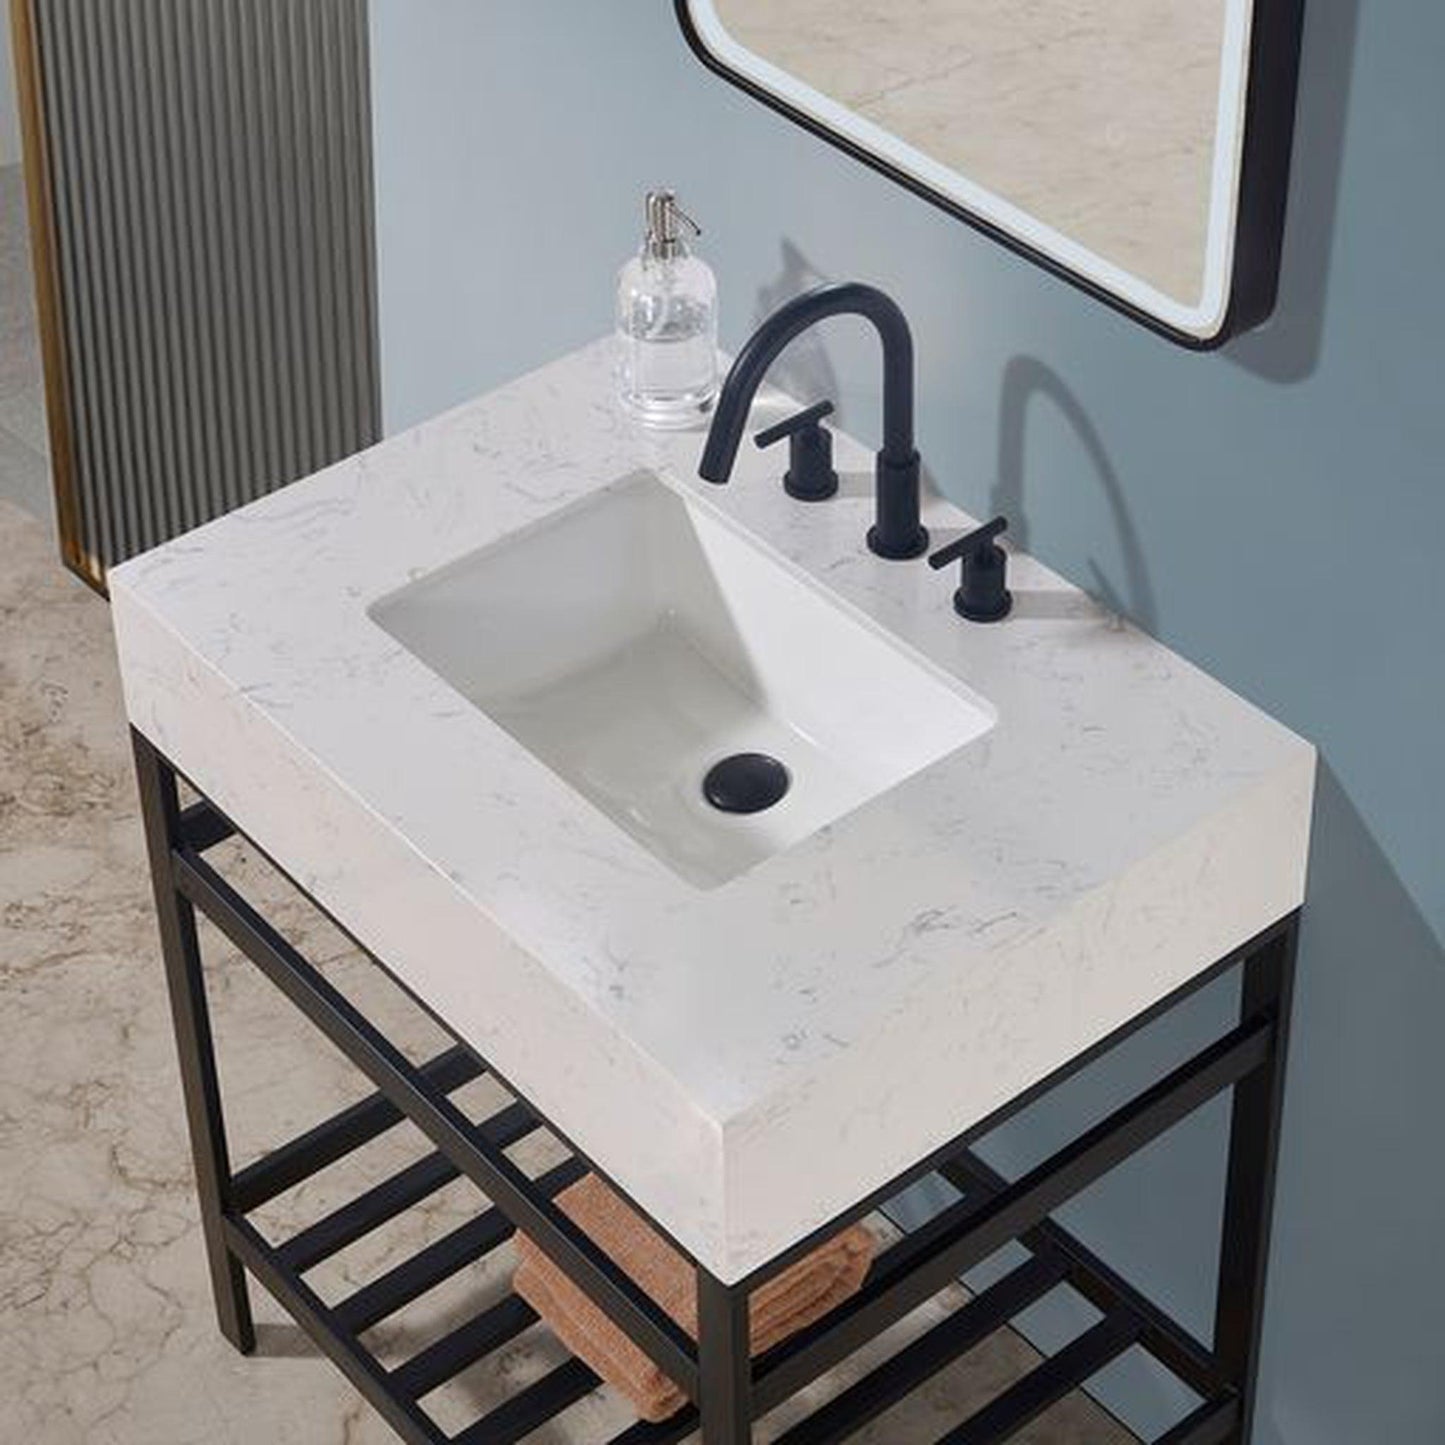 Altair Merano 30" Matte Black Single Stainless Steel Bathroom Vanity Set Console With Mirror, Aosta White Stone Top, Single Rectangular Undermount Ceramic Sink, and Safety Overflow Hole